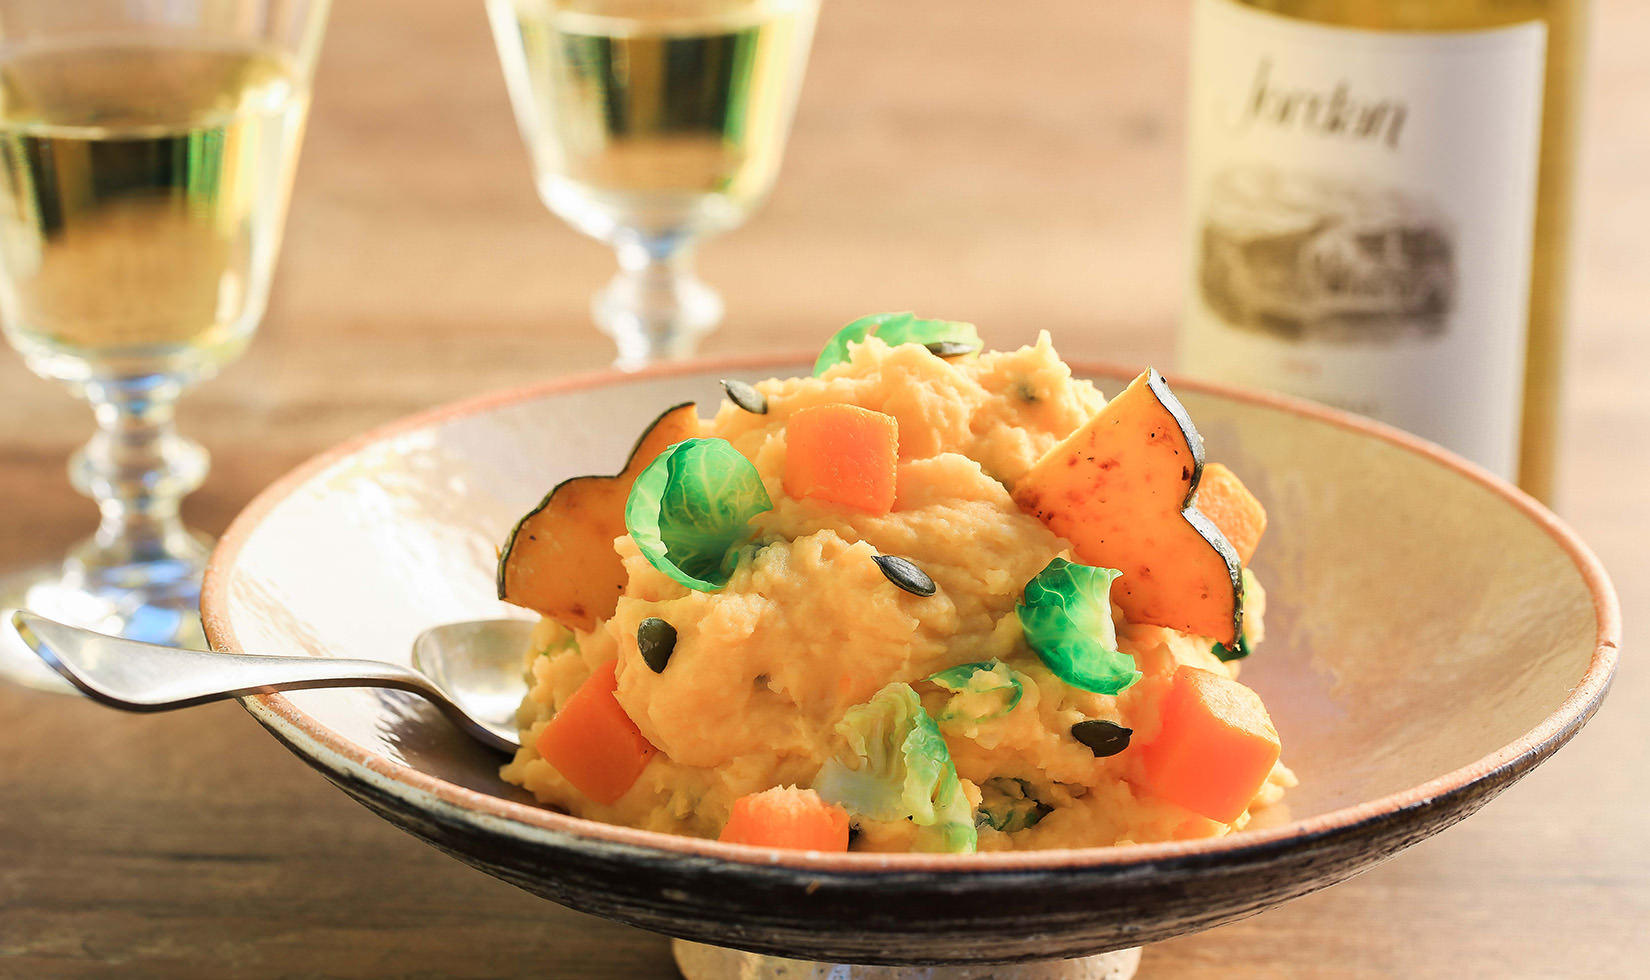 Jordan Winery Butternut Squash Mashed Potatoes with Acorn Squash and Pumpkin Seeds in bowl